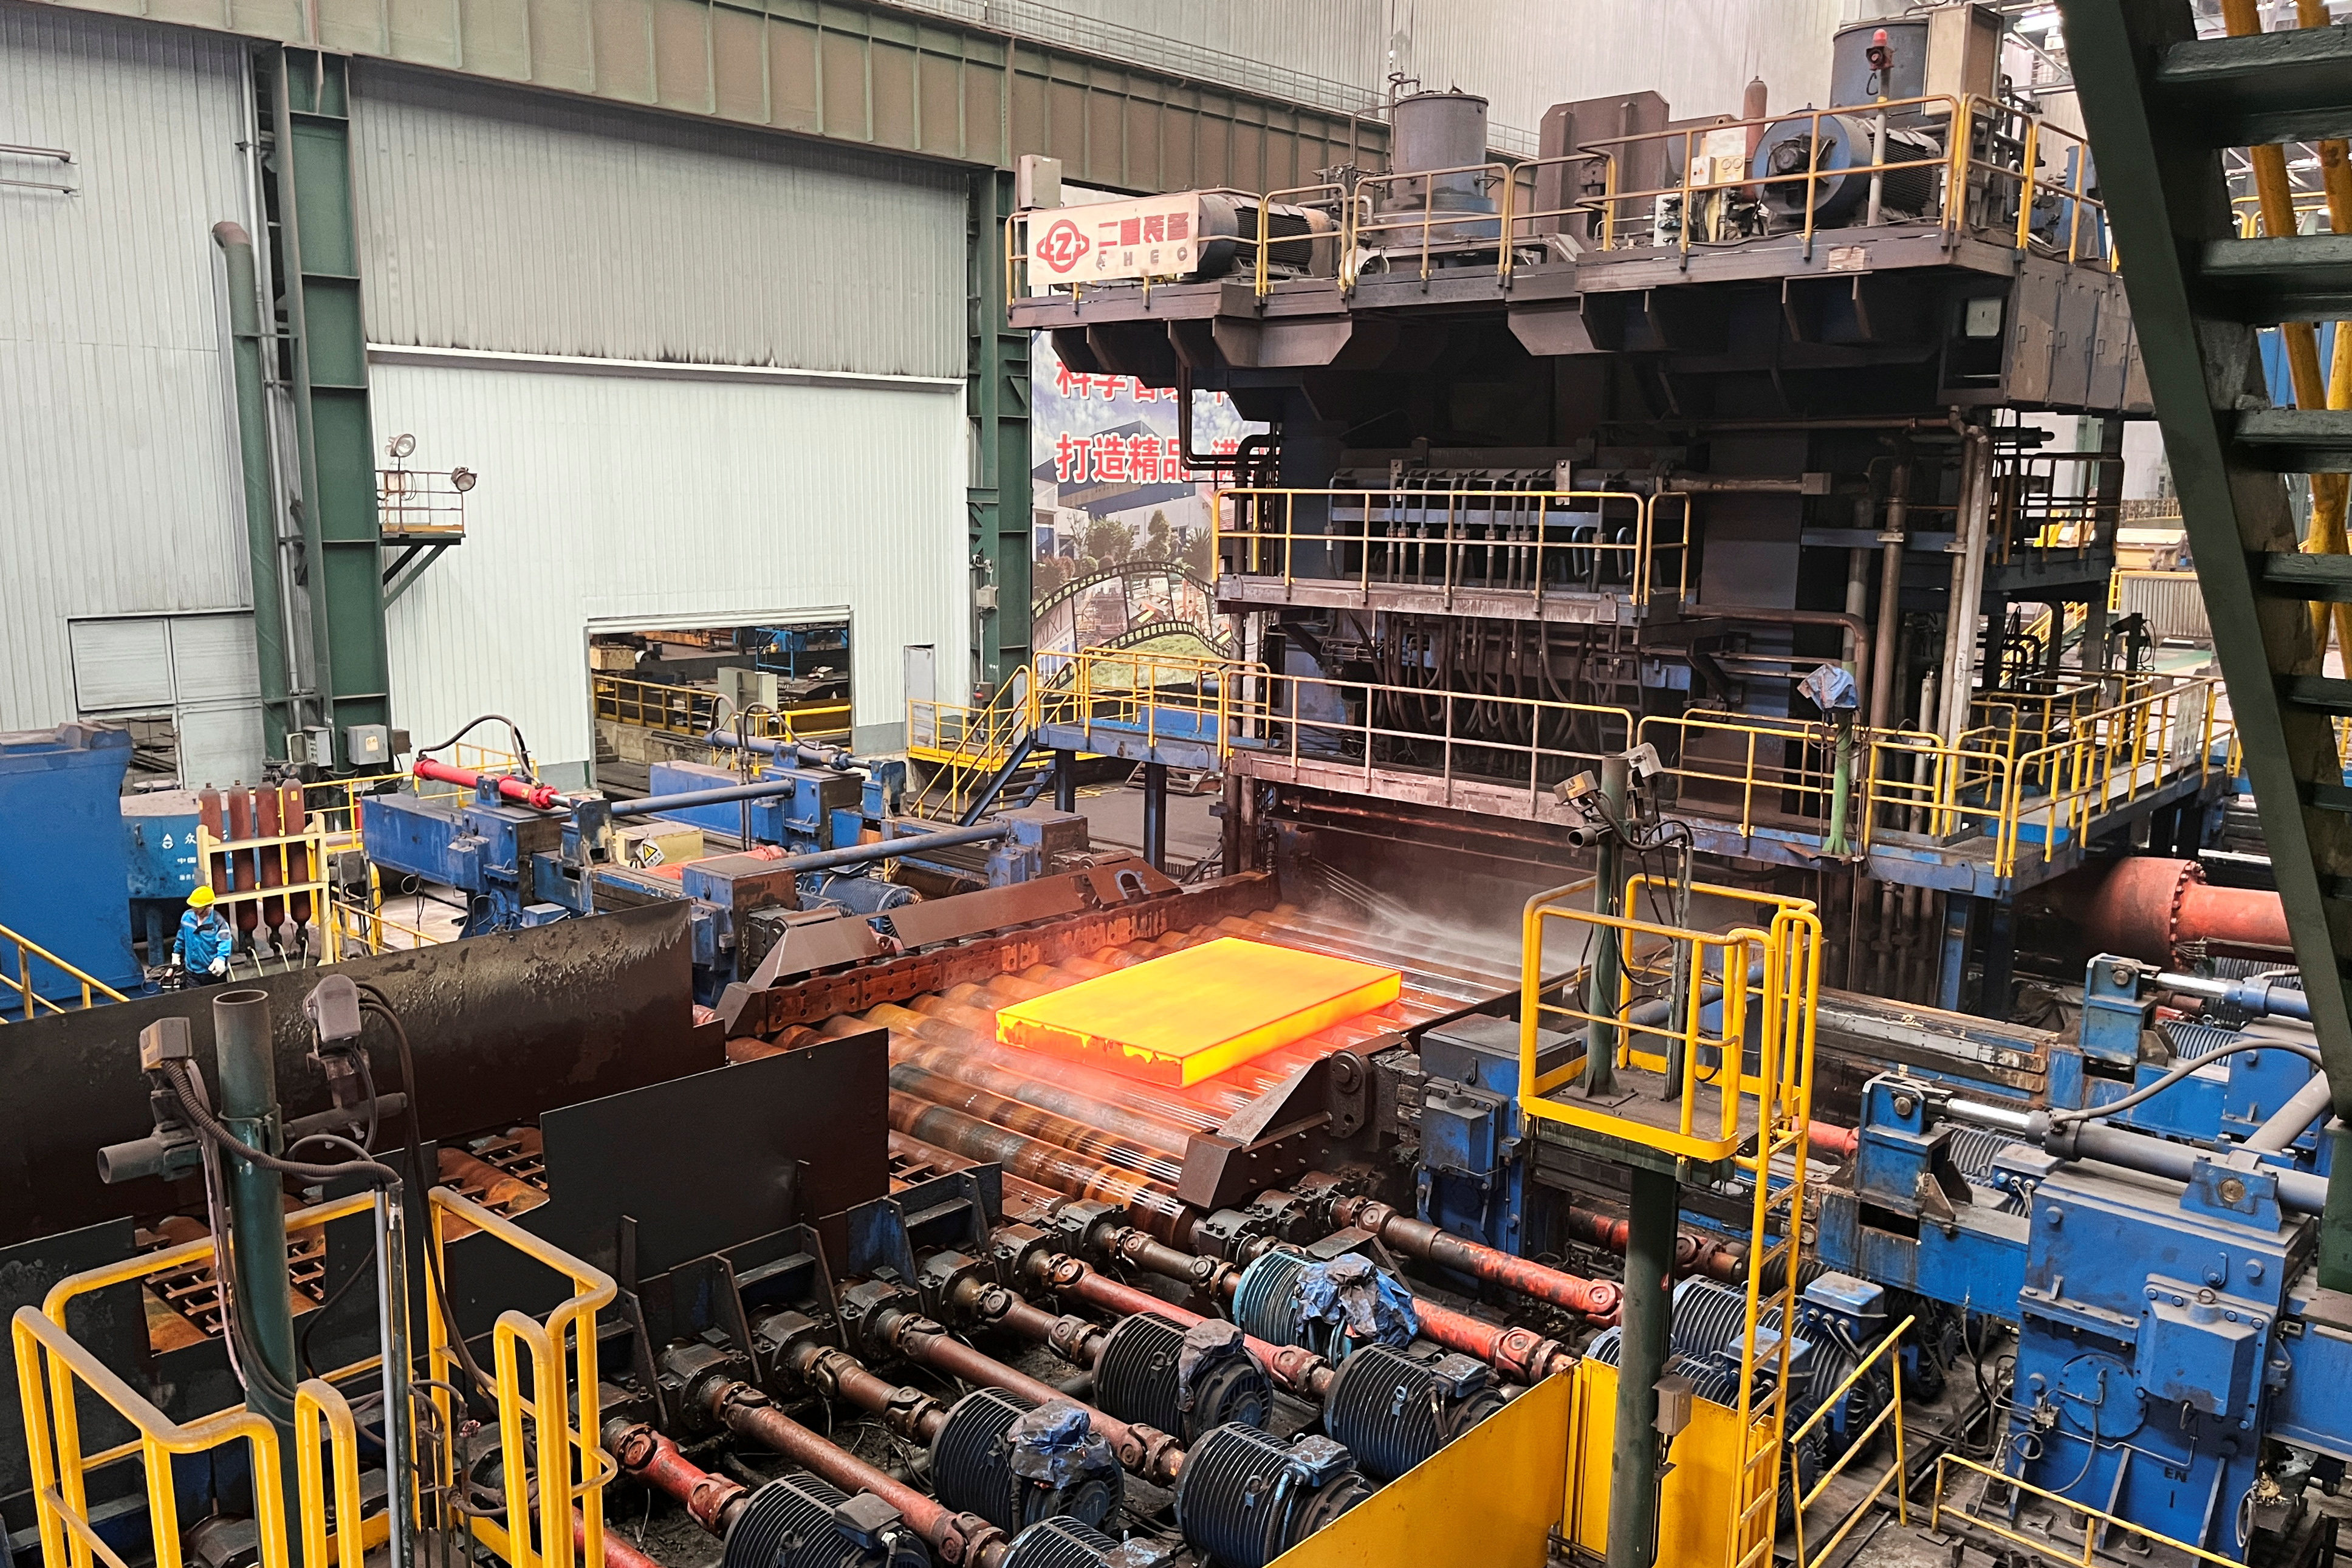 A steel billet being produced at a mill in Ezhou, Hubei on June 21. Most steel mills in China still use coal-burning blast furnaces and need to urgently and drastically cut their carbon emissions to meet national targets. Photo: Reuters